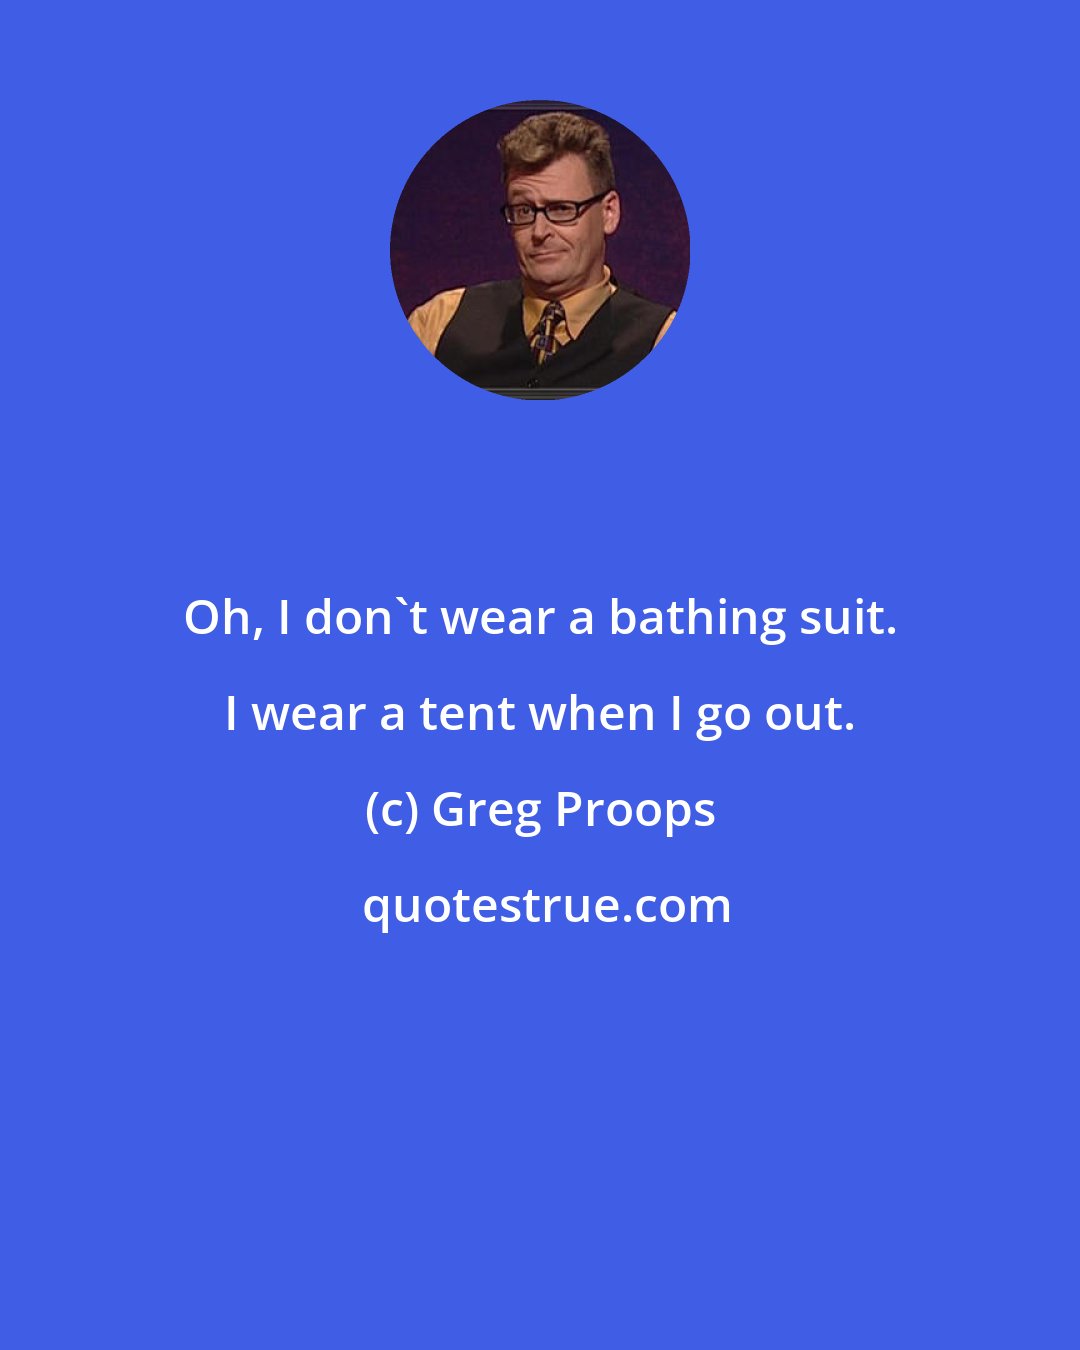 Greg Proops: Oh, I don't wear a bathing suit. I wear a tent when I go out.